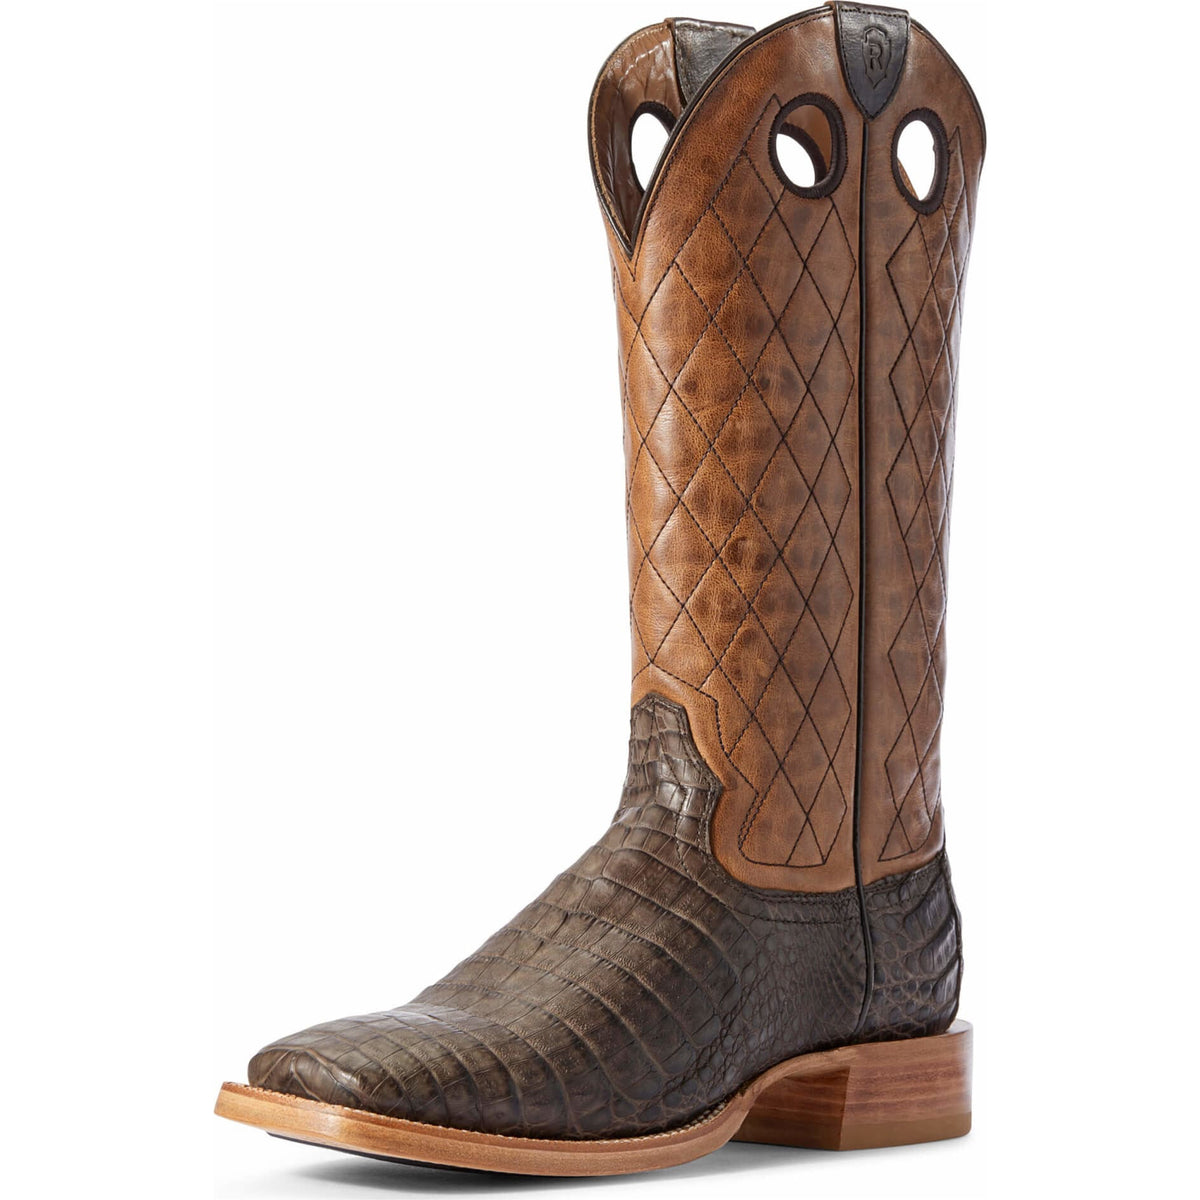 MEN'S RELENTLESS by ARIAT WINNERS CIRCLE CHOCOLATE CAIMAN BELLY BOOTS